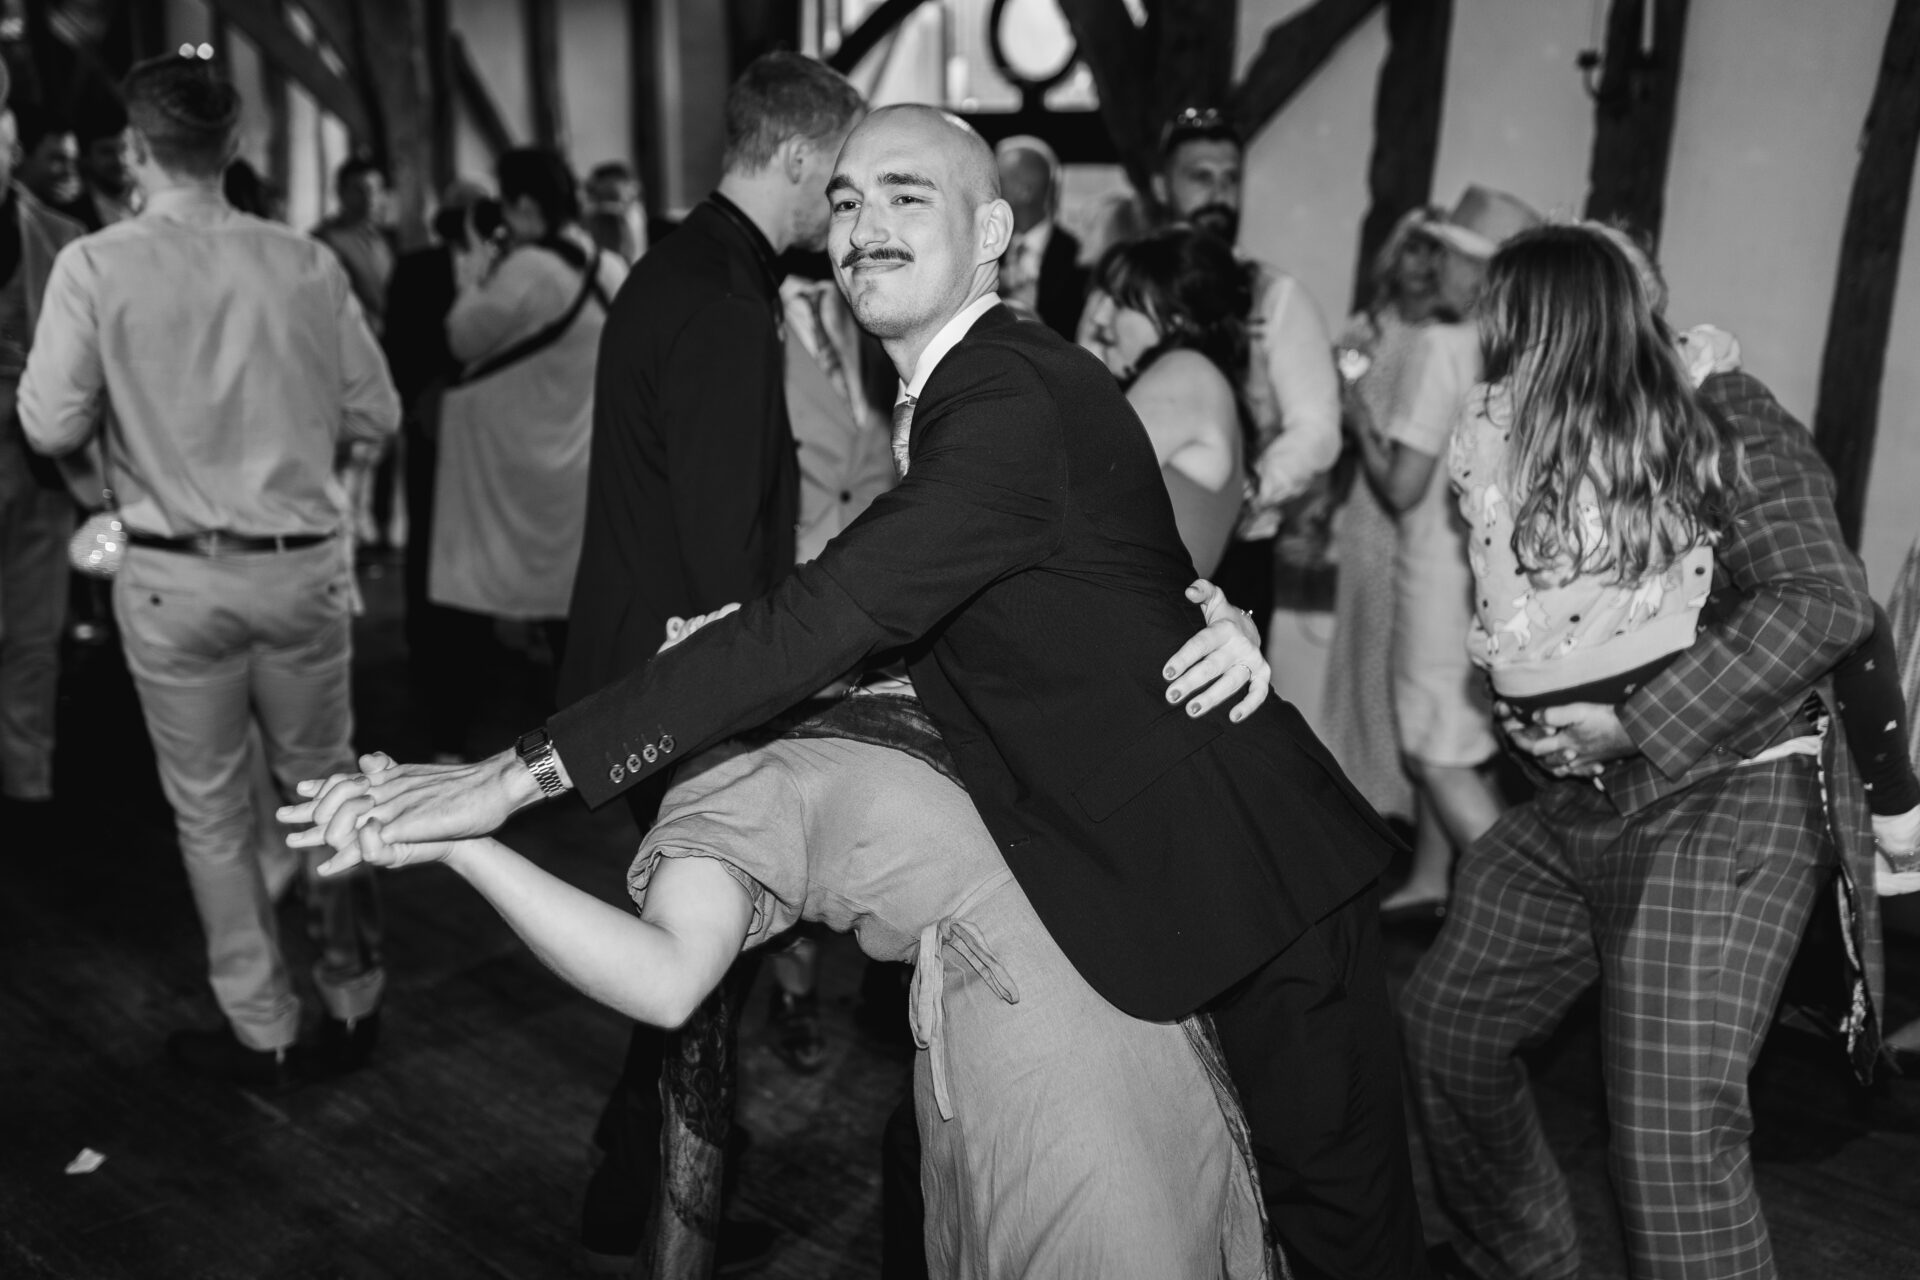 Wedding guests dance at Old Luxters Barn wedding venue in Oxfordshire